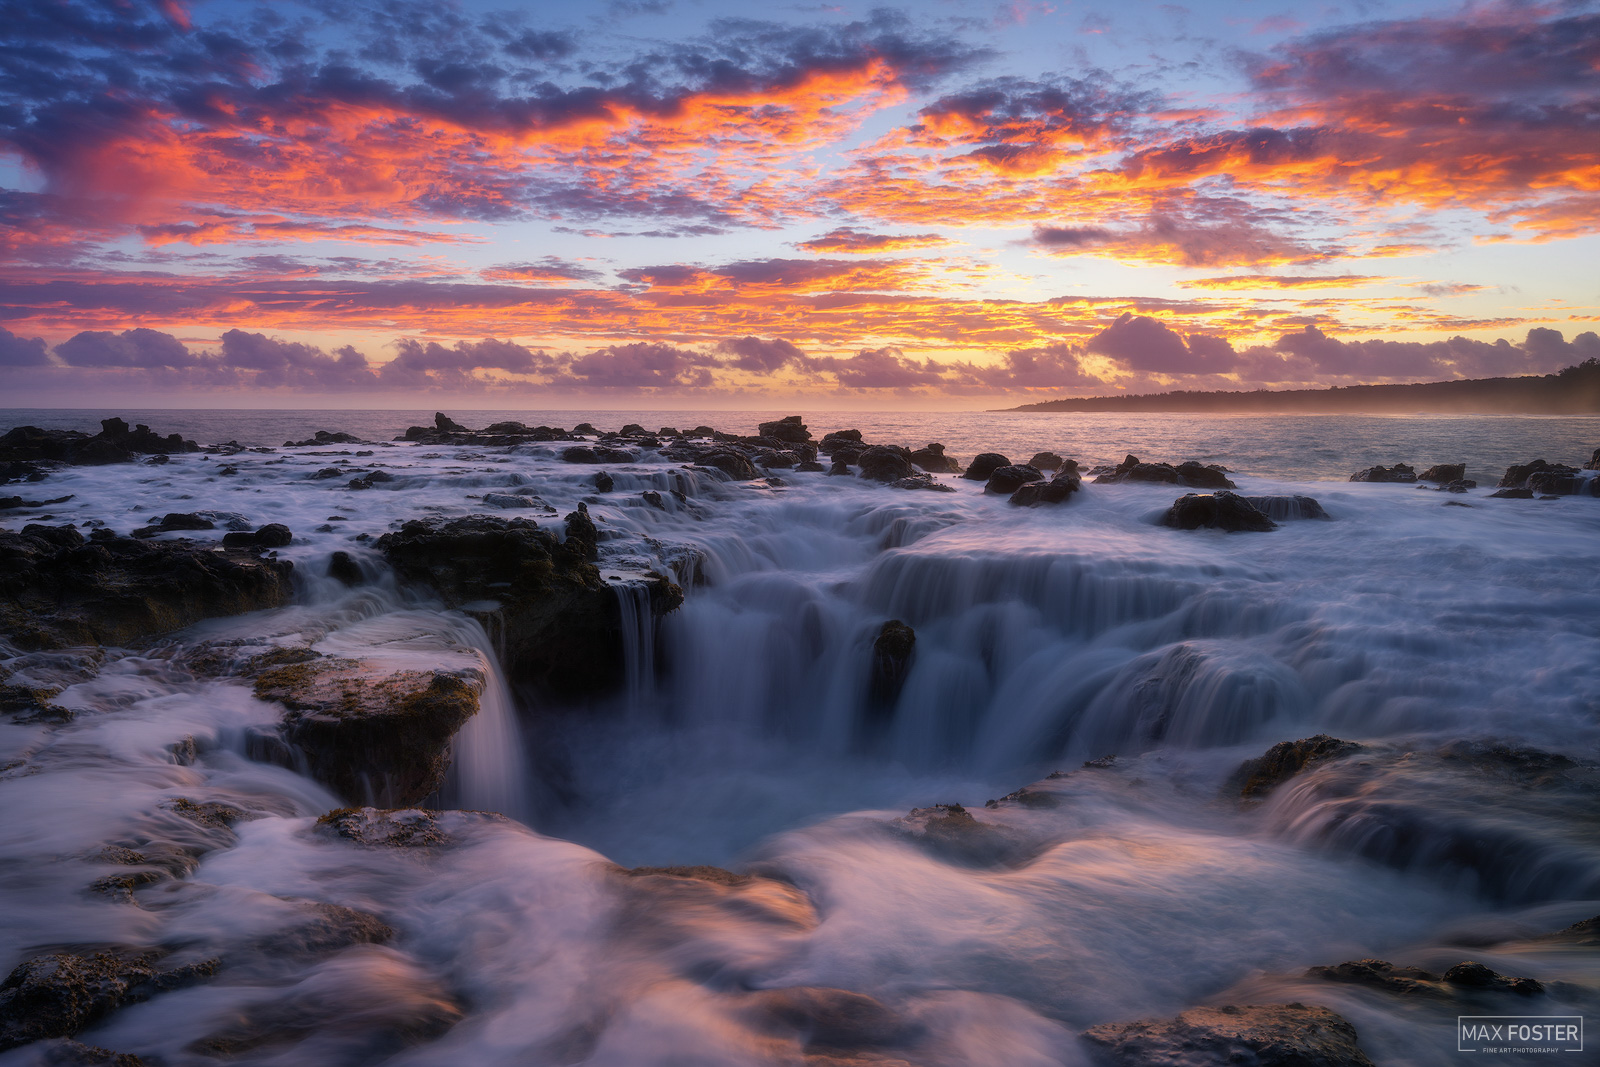 Bring nature into your home with Wellspring, Max Foster's limited edition photography print of lava pools on Kauai from his Hawaii...